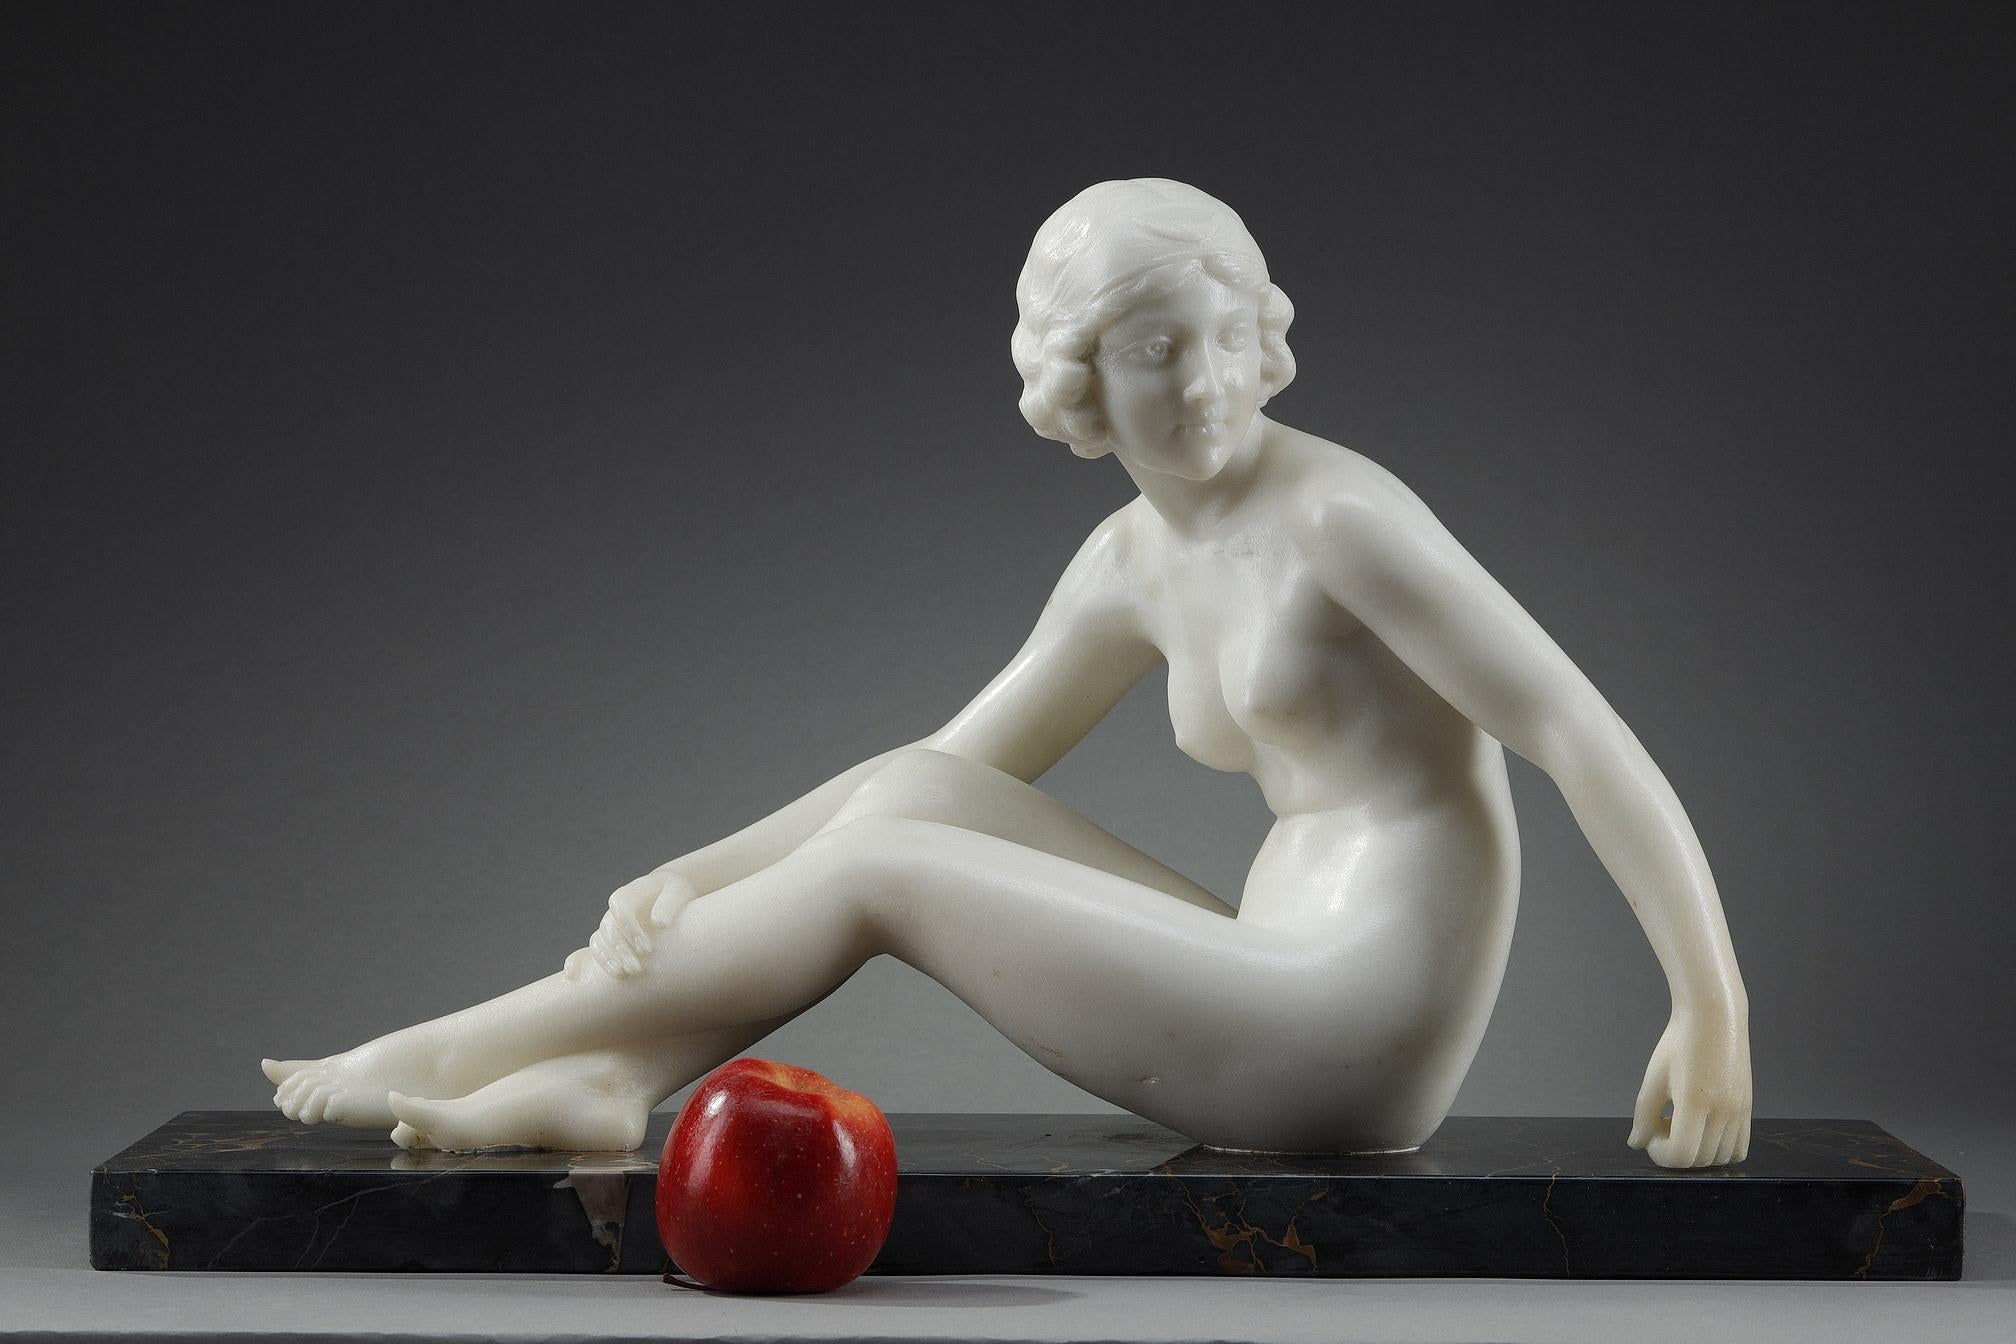 Art Deco Sculpture in white mabre after PUGI. It represents a nude woman sitting in a sensual way. Her short and curly hair, in the fashion of the Roaring Twenties, is topped with a headband showing a crescent moon. This may be a representation of